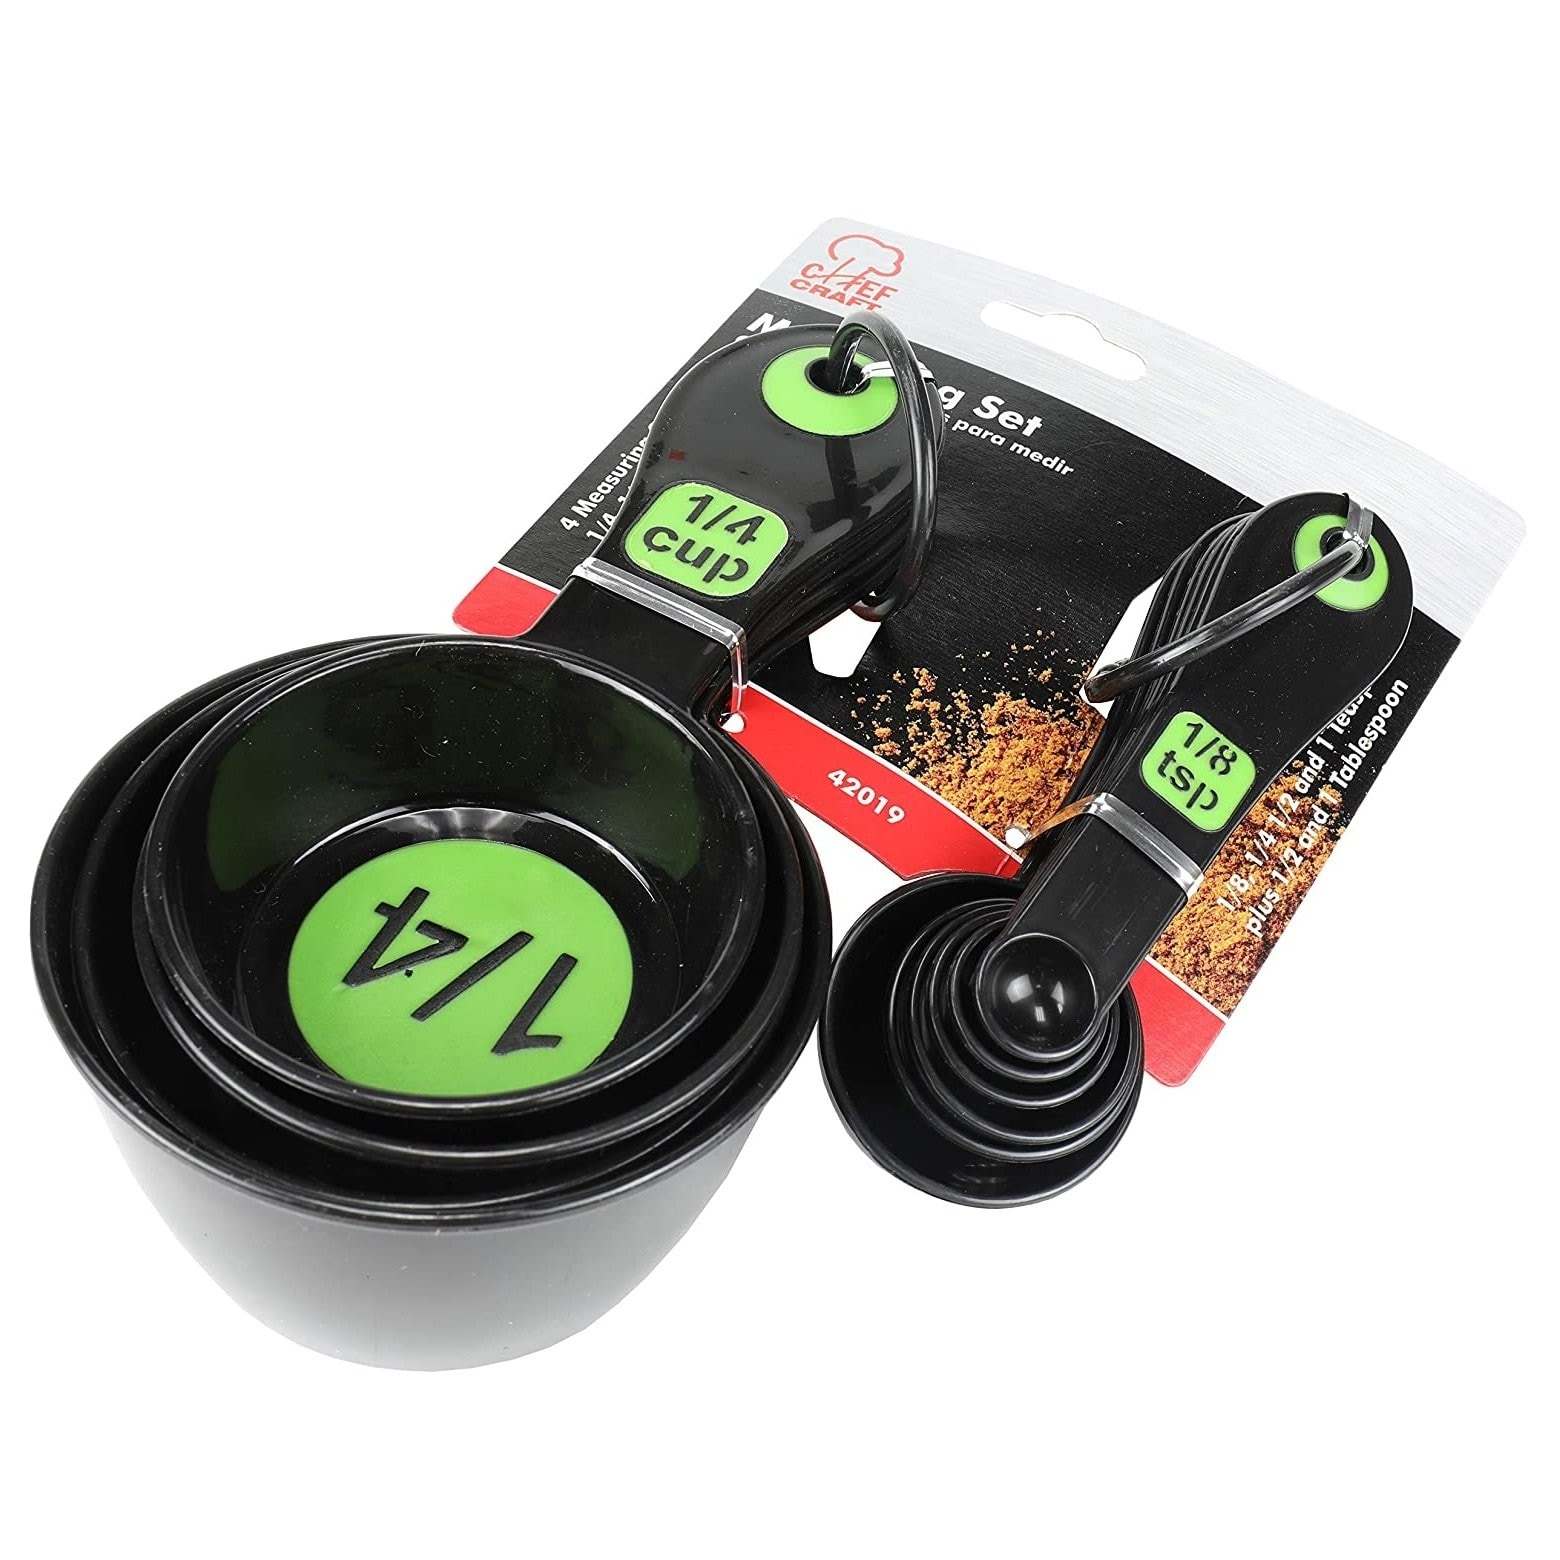 Green on Black Measuring Cups and Spoons Set